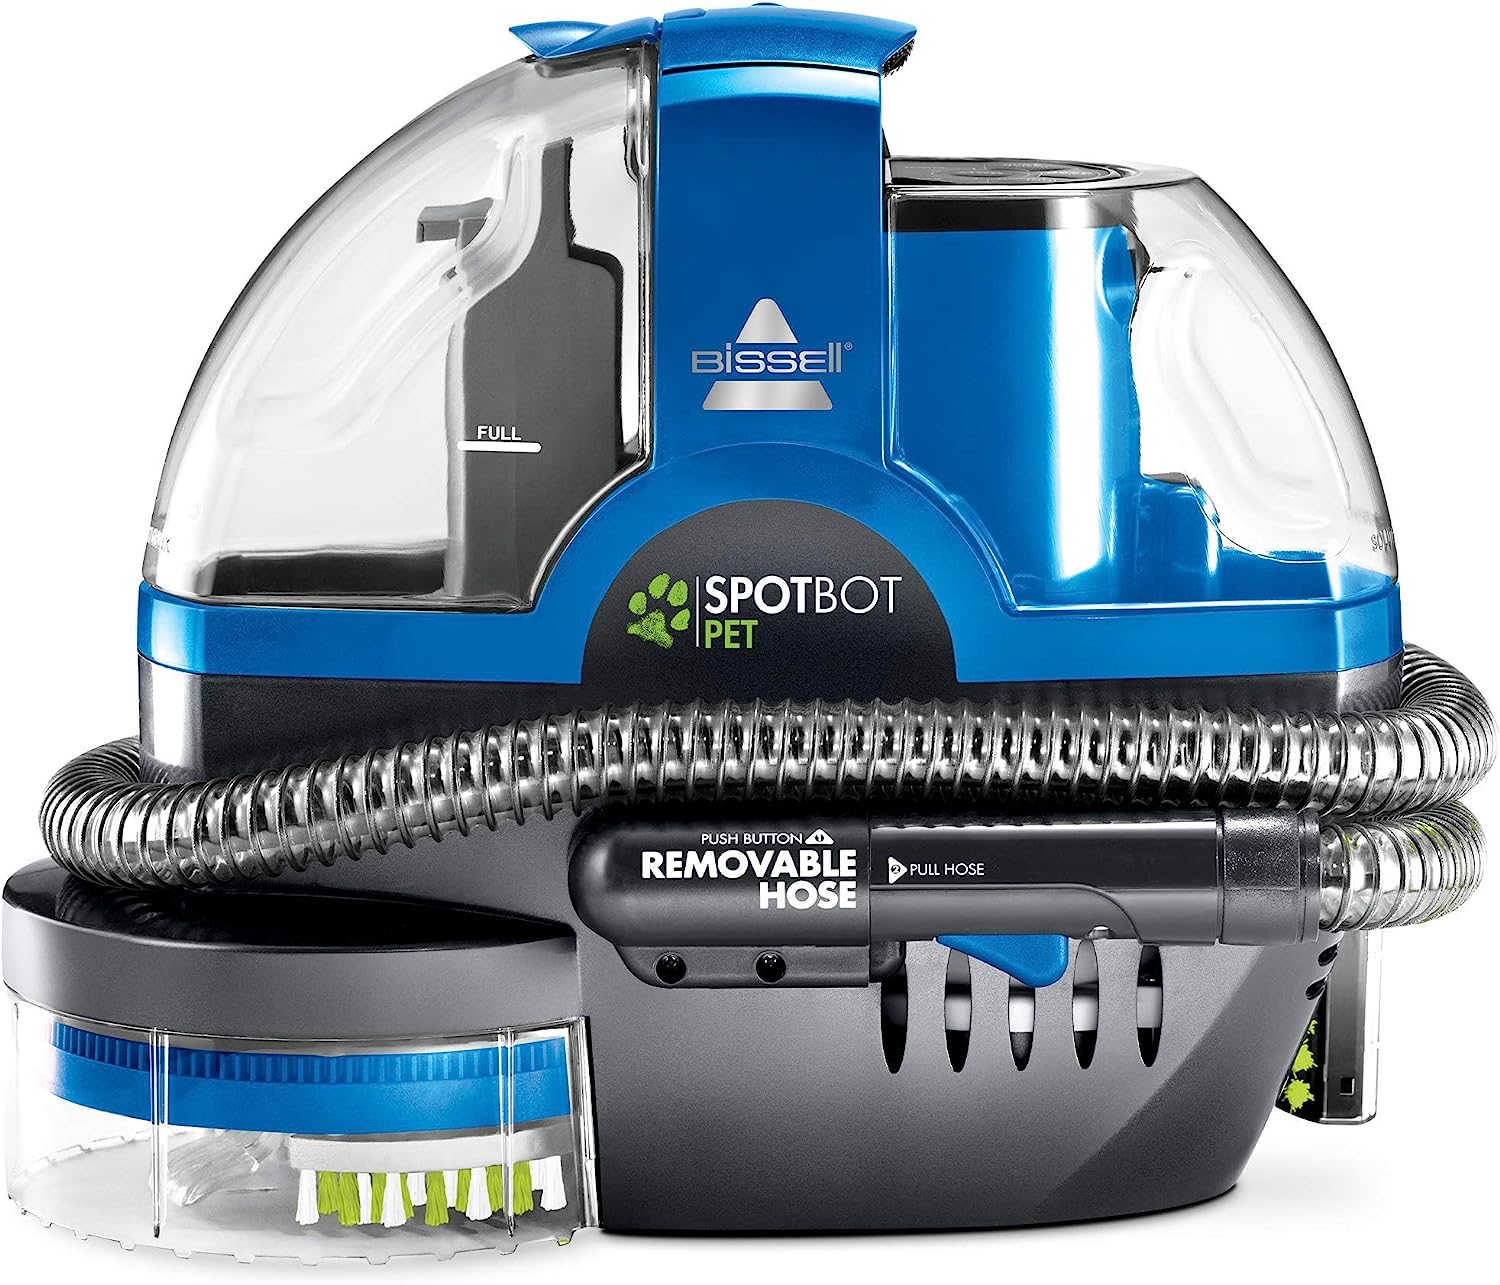 Bissell SpotBot Pet handsfree Spot and Stain Portable [...]